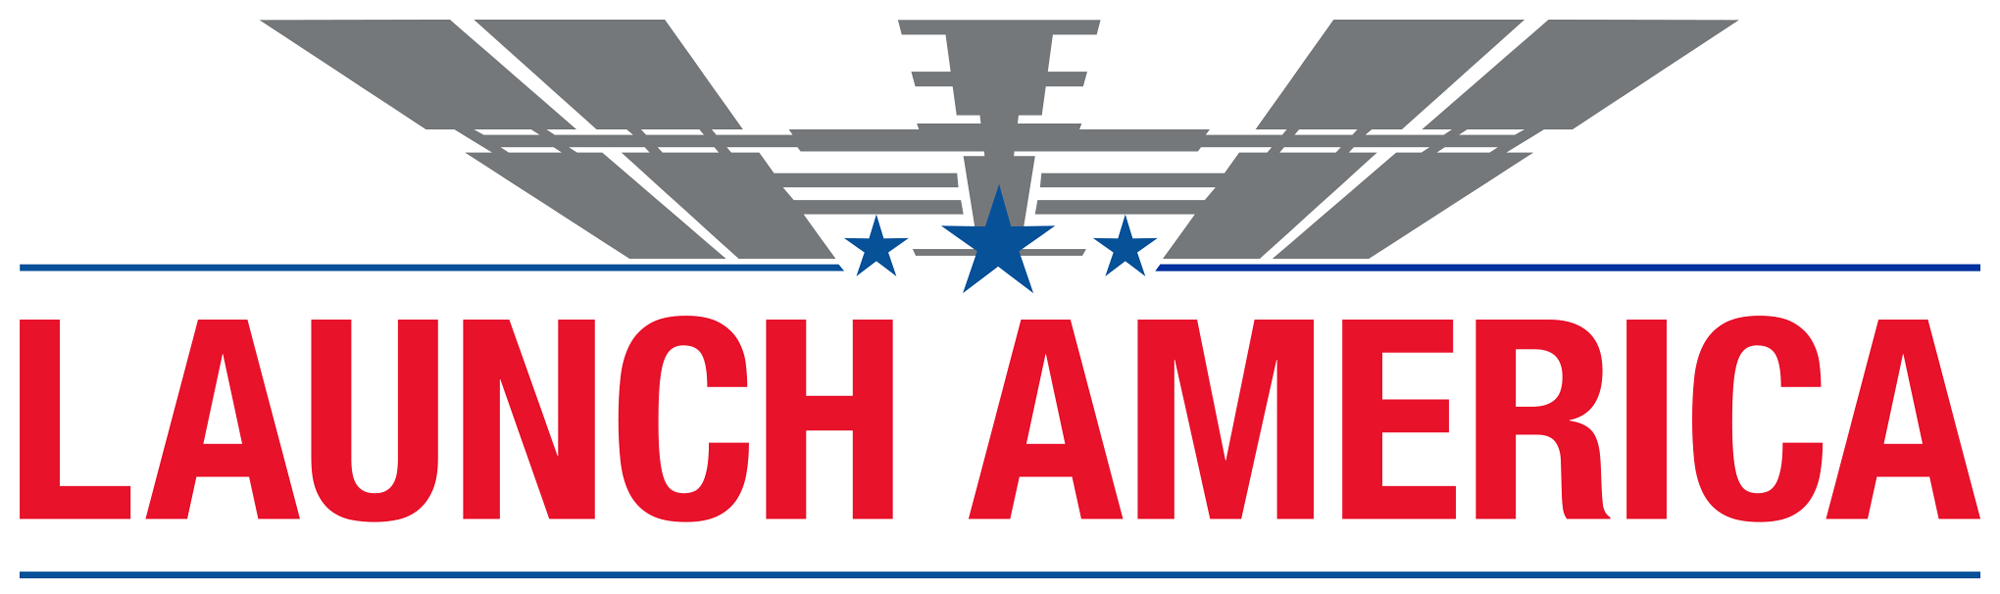 New Broadcast Graphics for Launch America by Oxcart Assembly